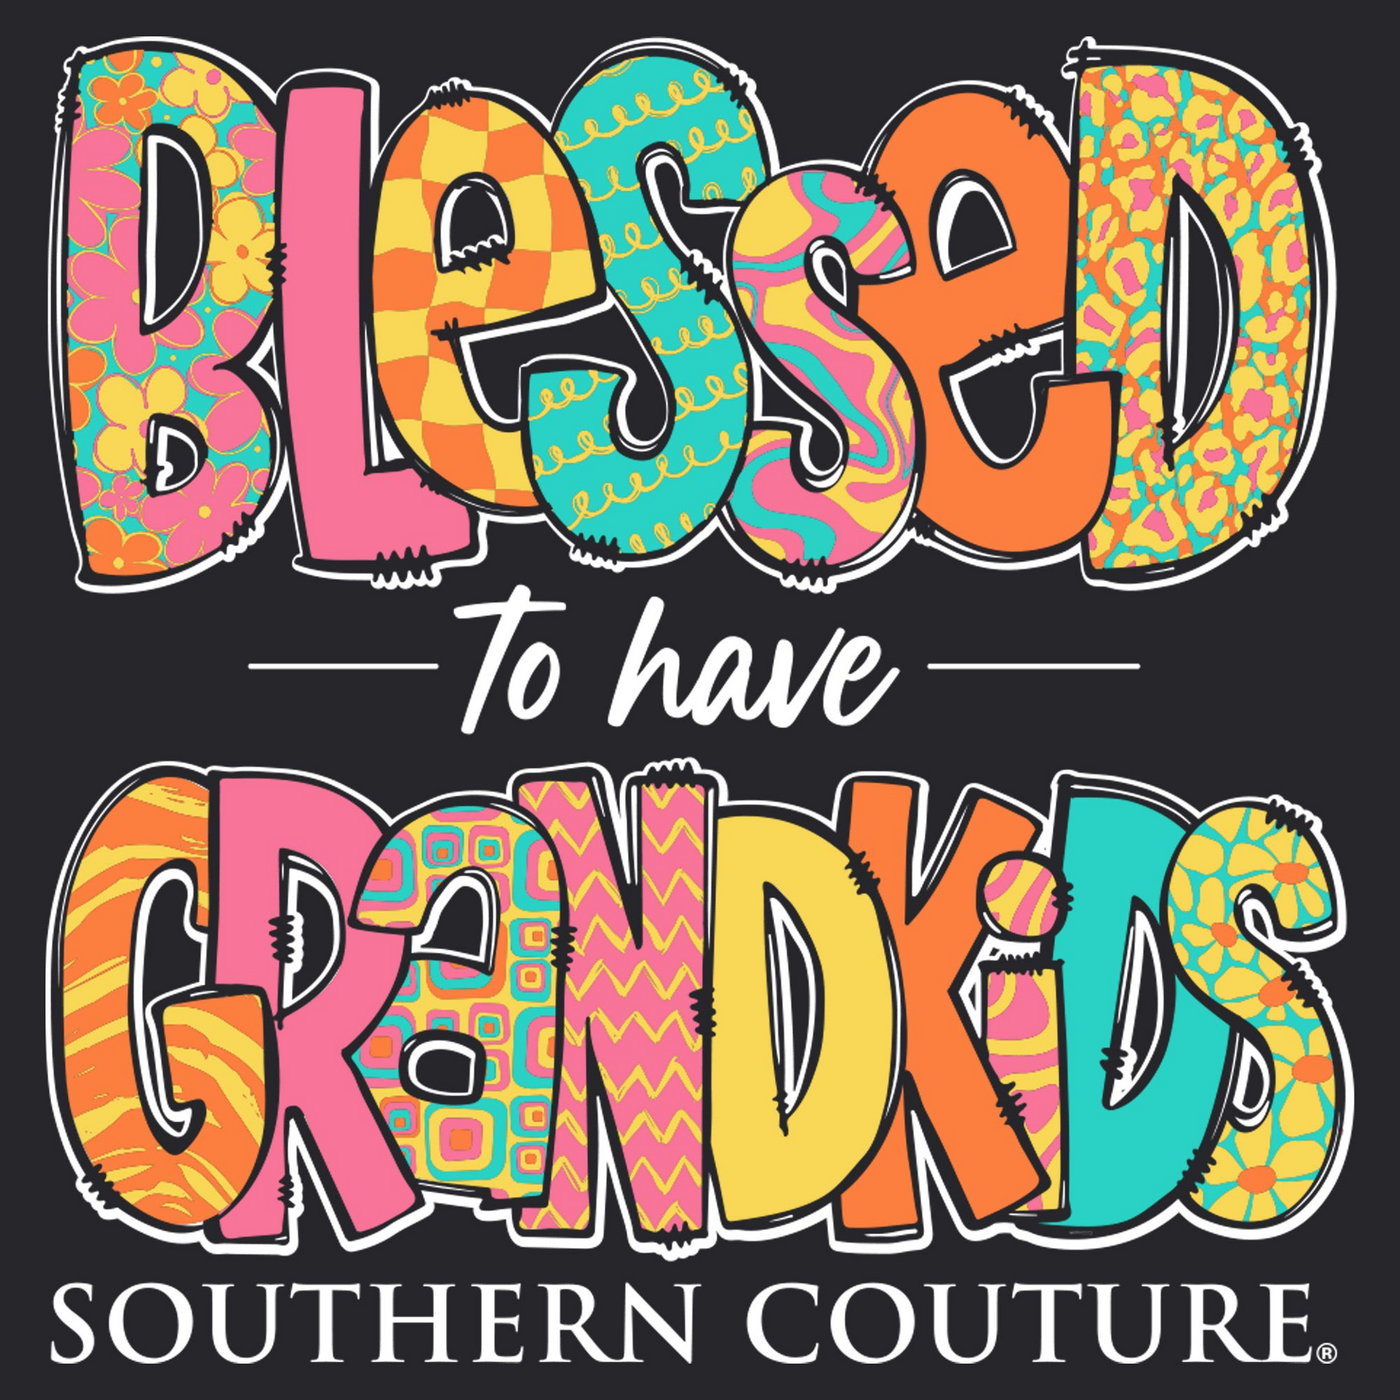 Southern Couture Blessed To Have Grandkids Black SS